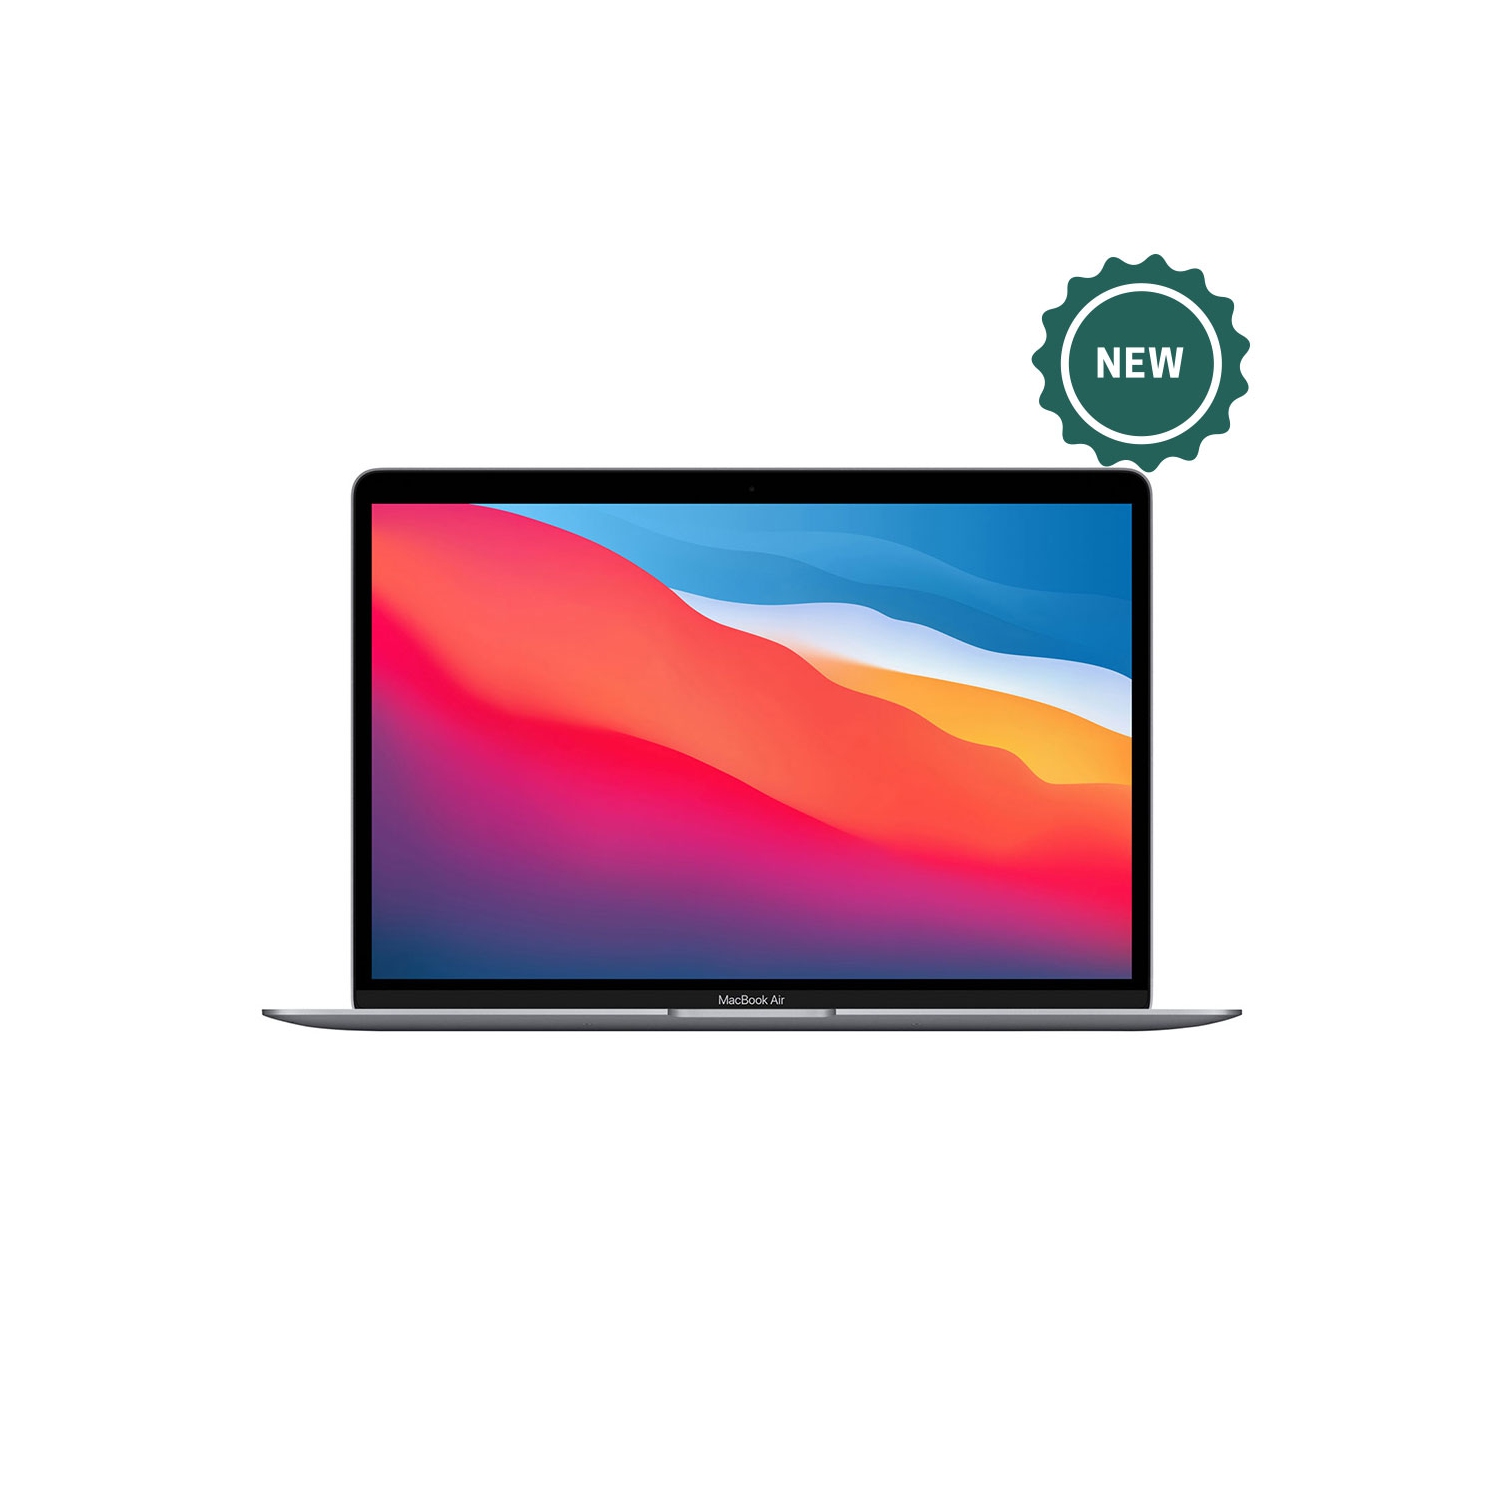 Apple MacBook Air 13.3" with Touch ID (Fall 2020) (Apple M1 Chip / 8GB RAM / 256GB SSD / Space Gray) FRENCH - New